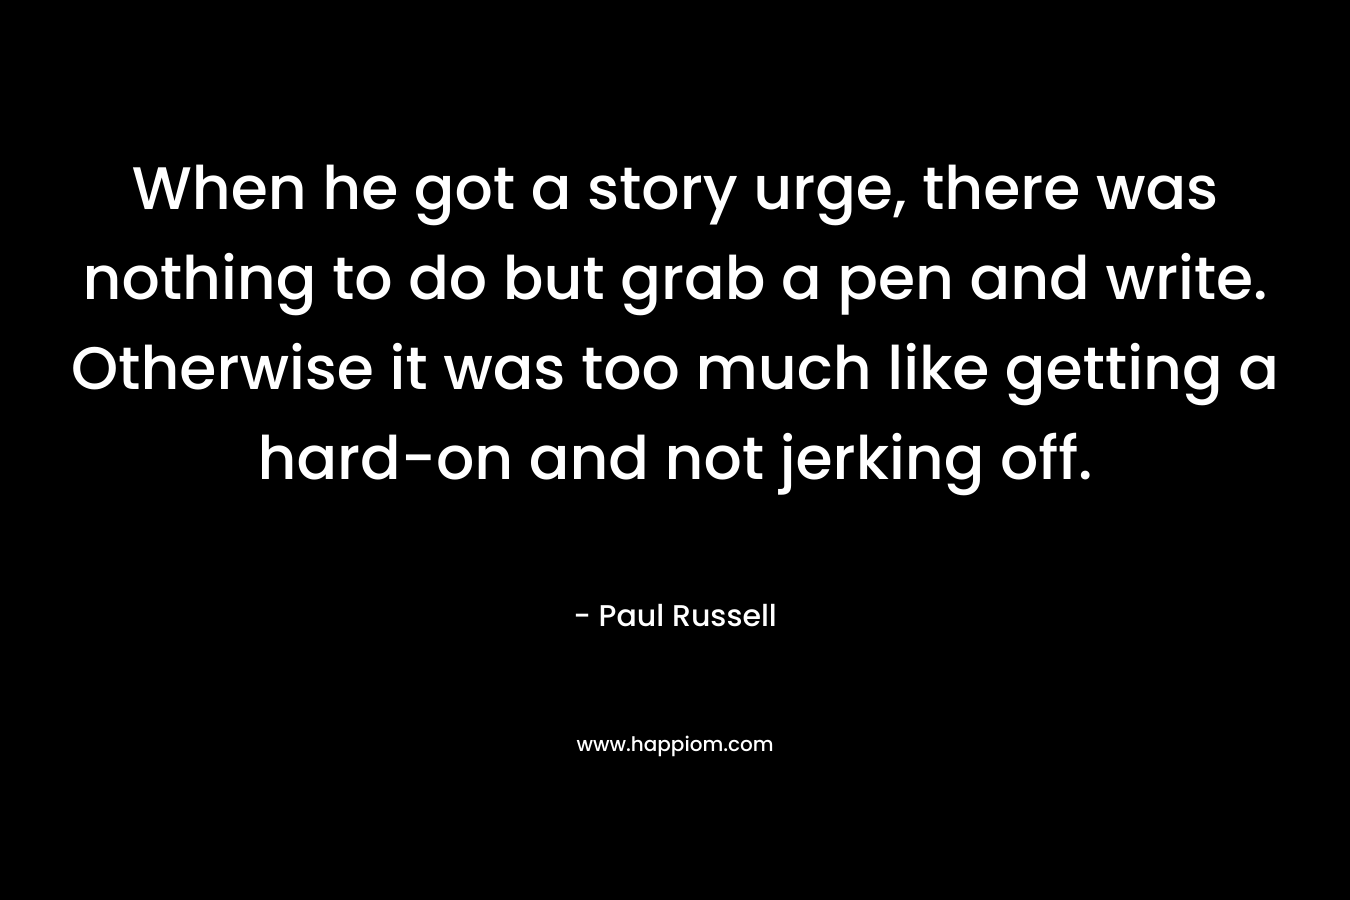 When he got a story urge, there was nothing to do but grab a pen and write. Otherwise it was too much like getting a hard-on and not jerking off. – Paul Russell